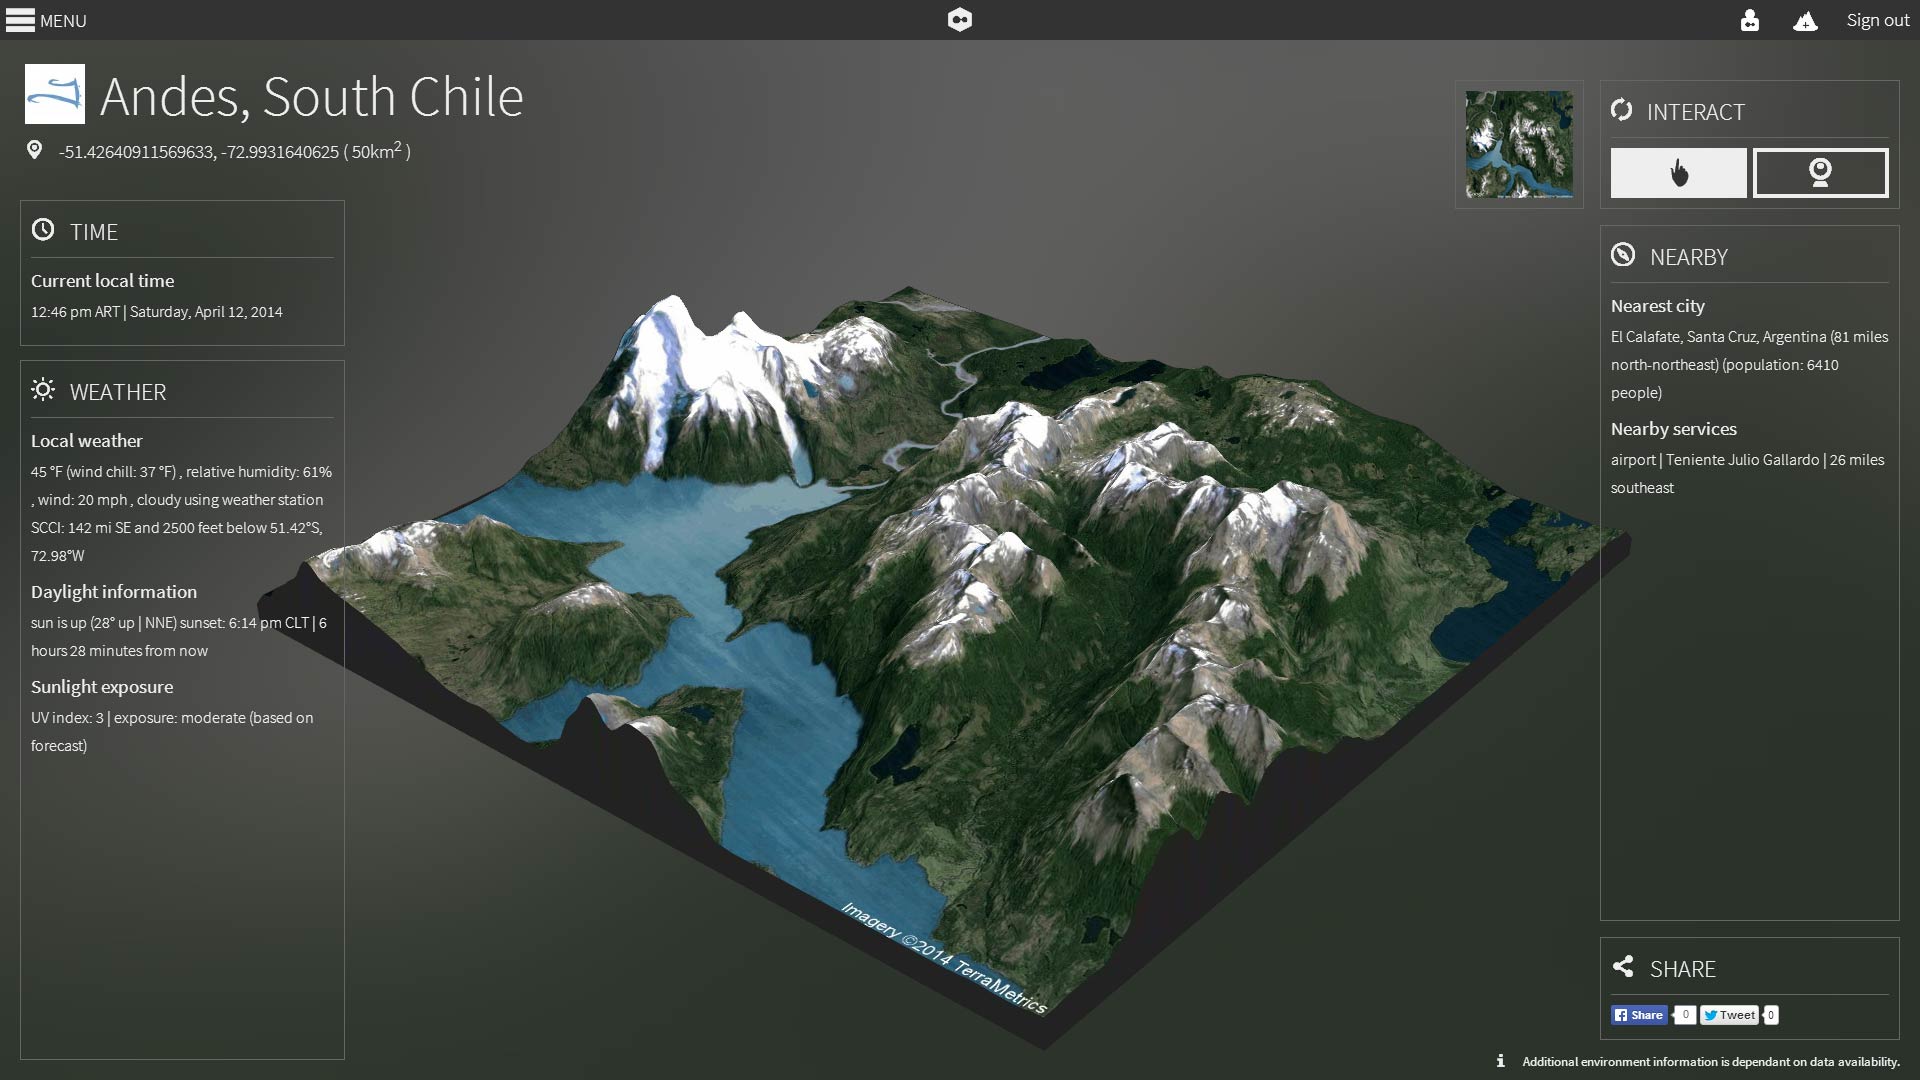 A UI with a 3D model of a mountain glacial landscape as the prominent feature. It is surrounded by information about the local area such as time, weather and what's nearby.